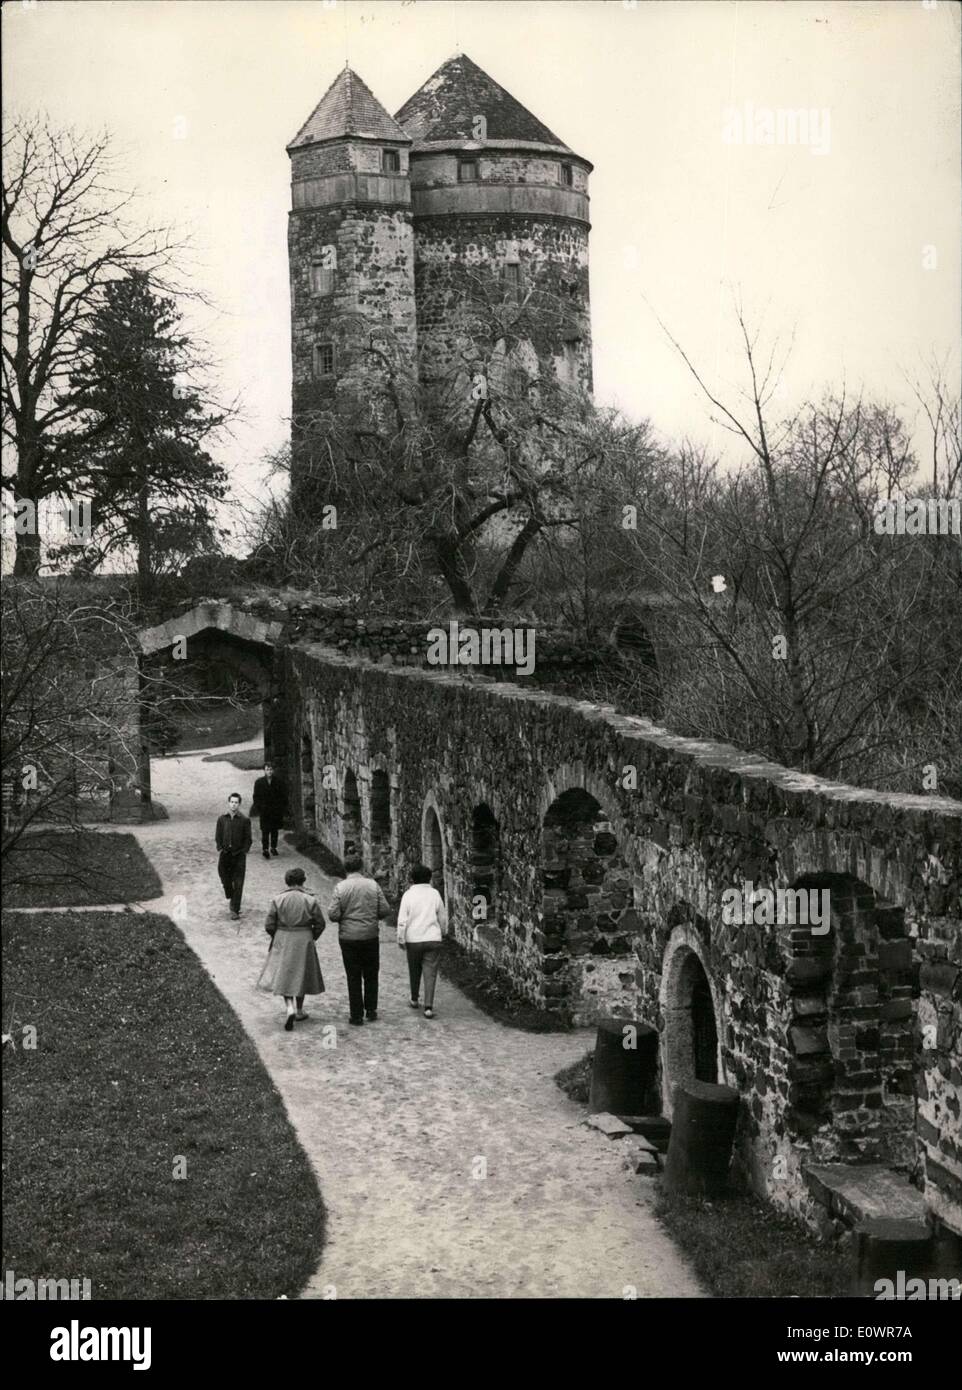 Nov. 16, 1963 - Pictured are the castle ruins of Stolpen/Sachsen. They castle itself was repeatedly beset by fires in 1632, 1723, and 1833, being nearly completely annihilated and then destroyed during wartime. 400 years ago Martin Planer succeeded in lobbying elector August von Sachsen in creating an extensive water conveyance system known as ''Wasserkunst.'' The castle was occupied by Countess Cosel from 1716 to 1765. She was a prisoner there. Stock Photo